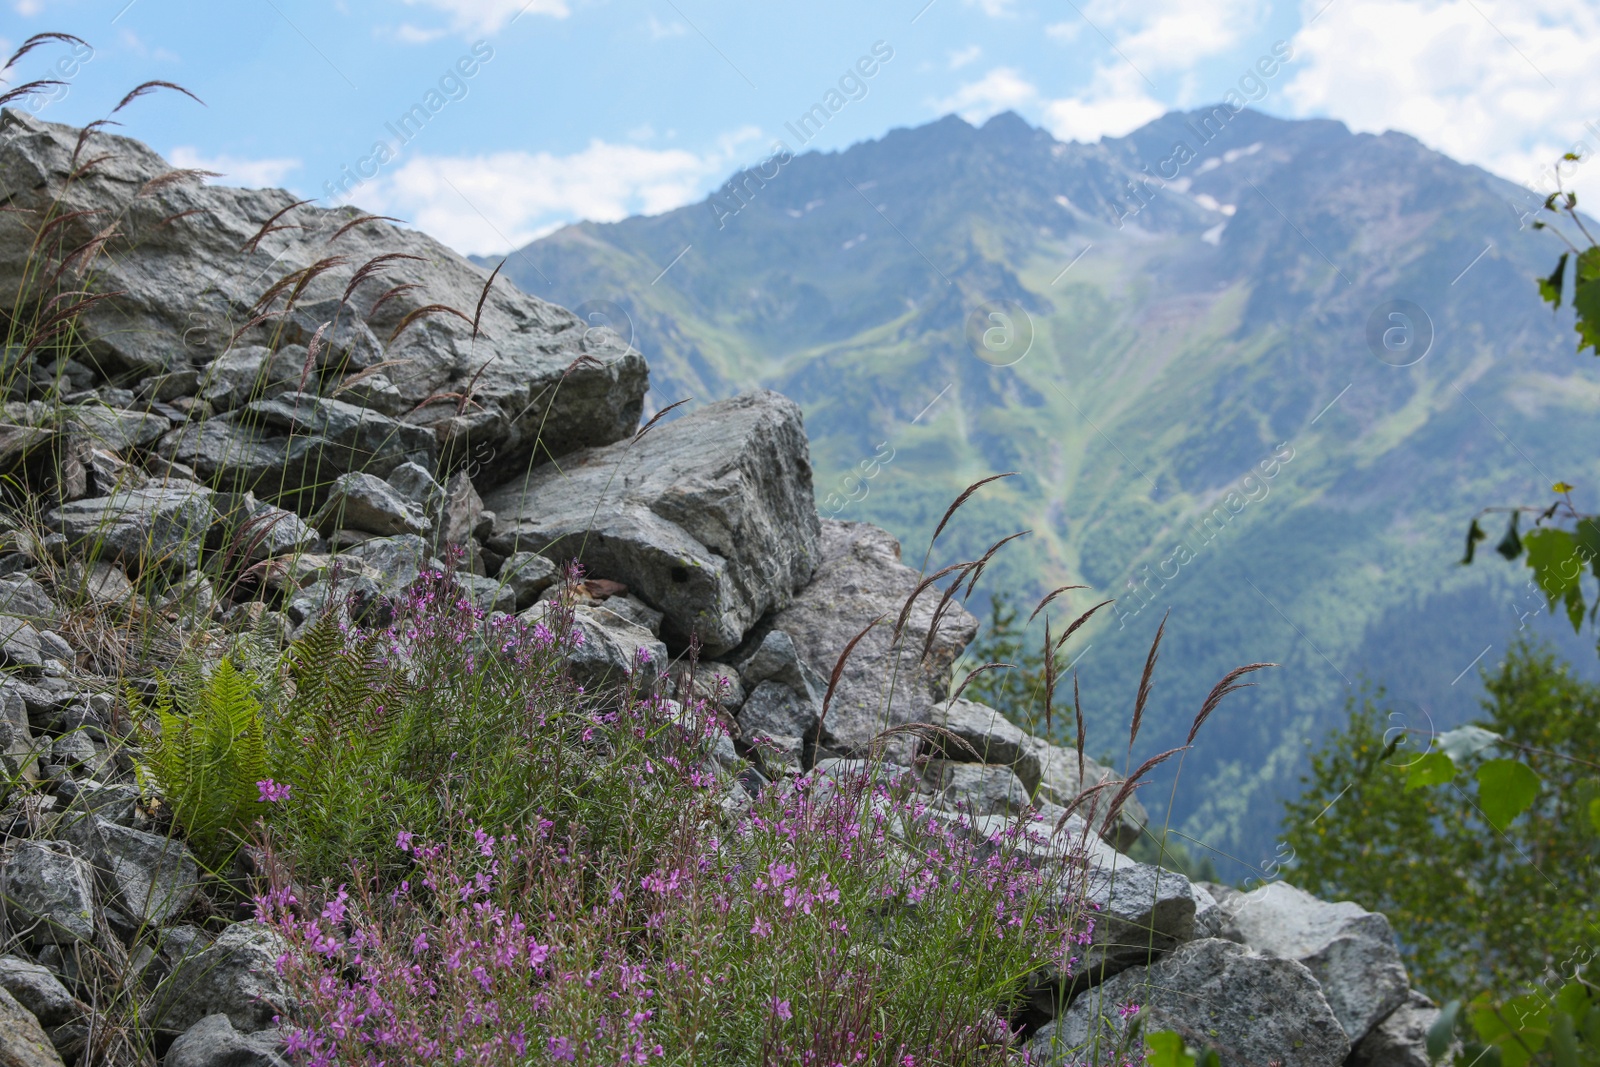 Photo of Picturesque view of wild flowers growing in mountains